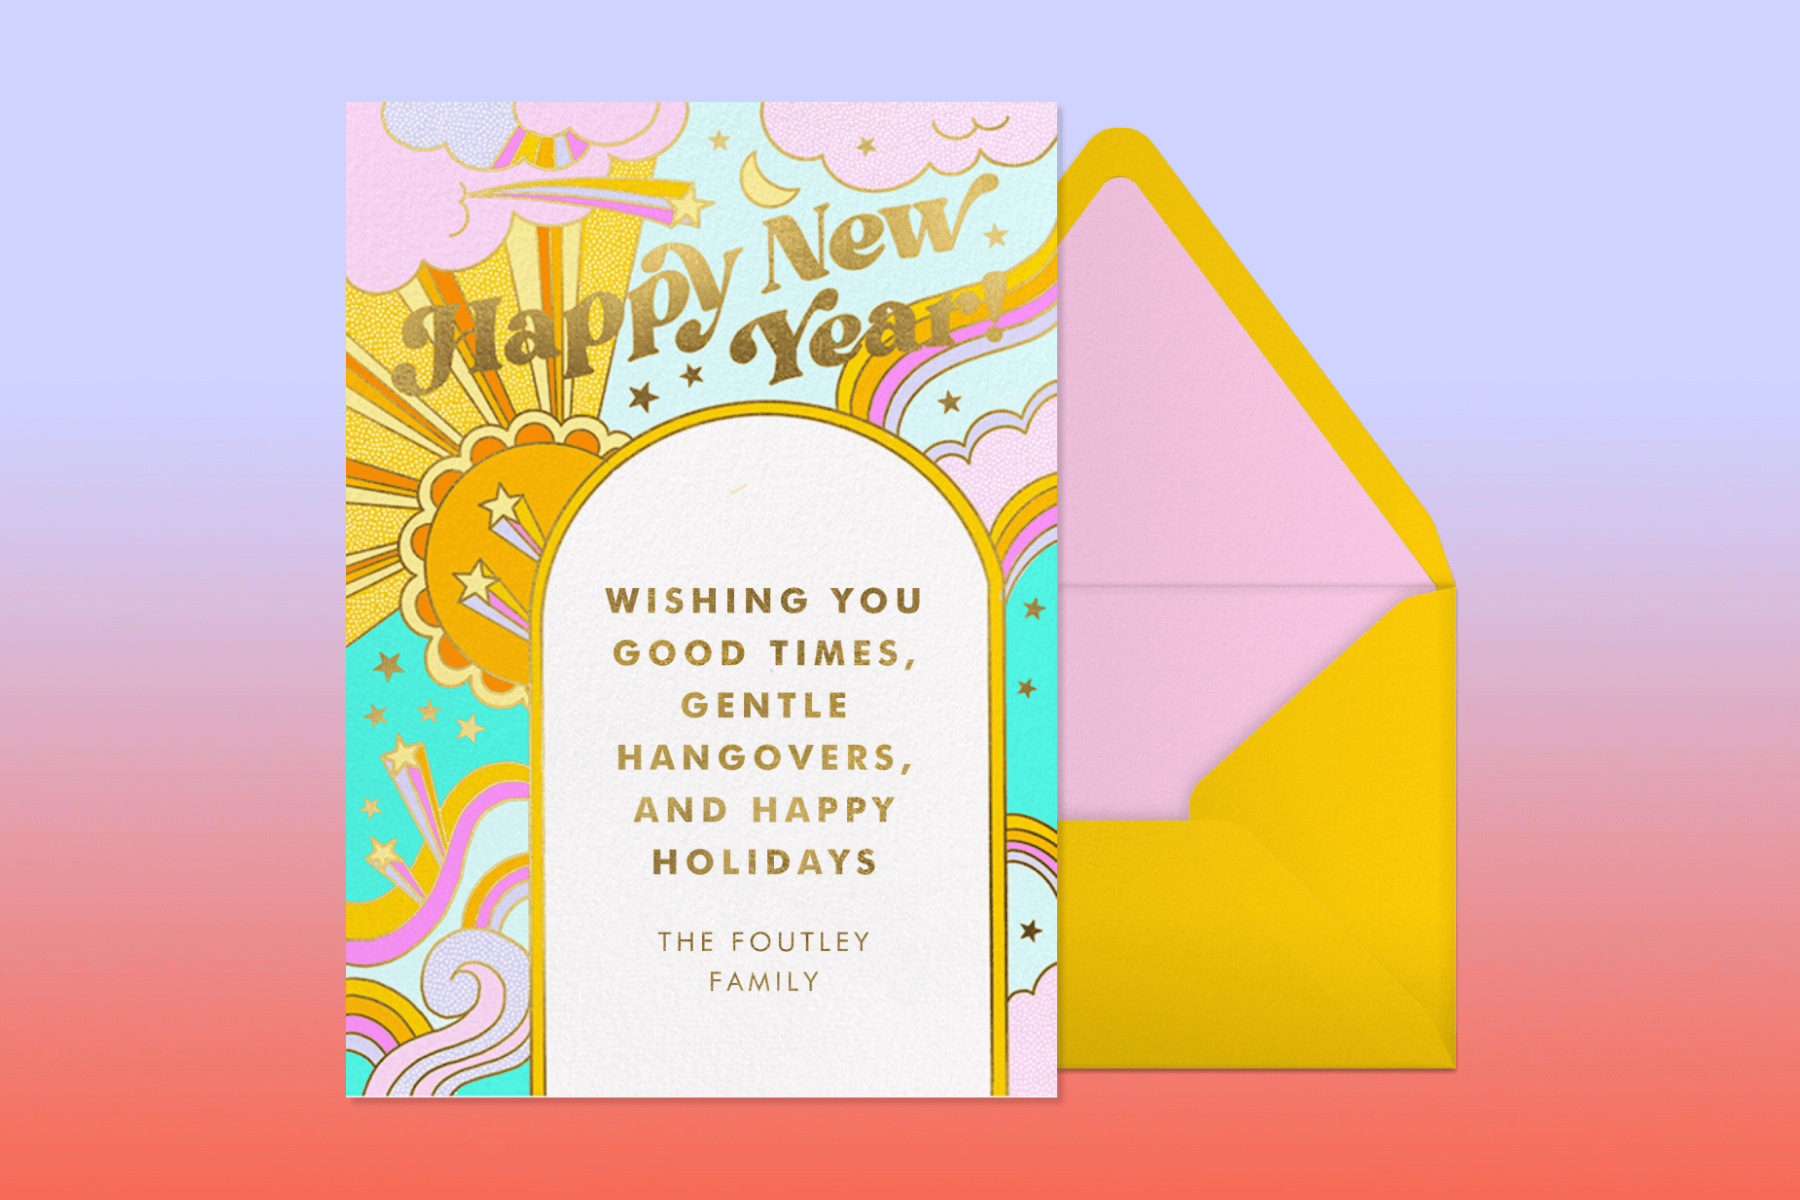 A new year card with an arch frame and a psychedelic sky scene featuring the phrase "Happy New Year!"